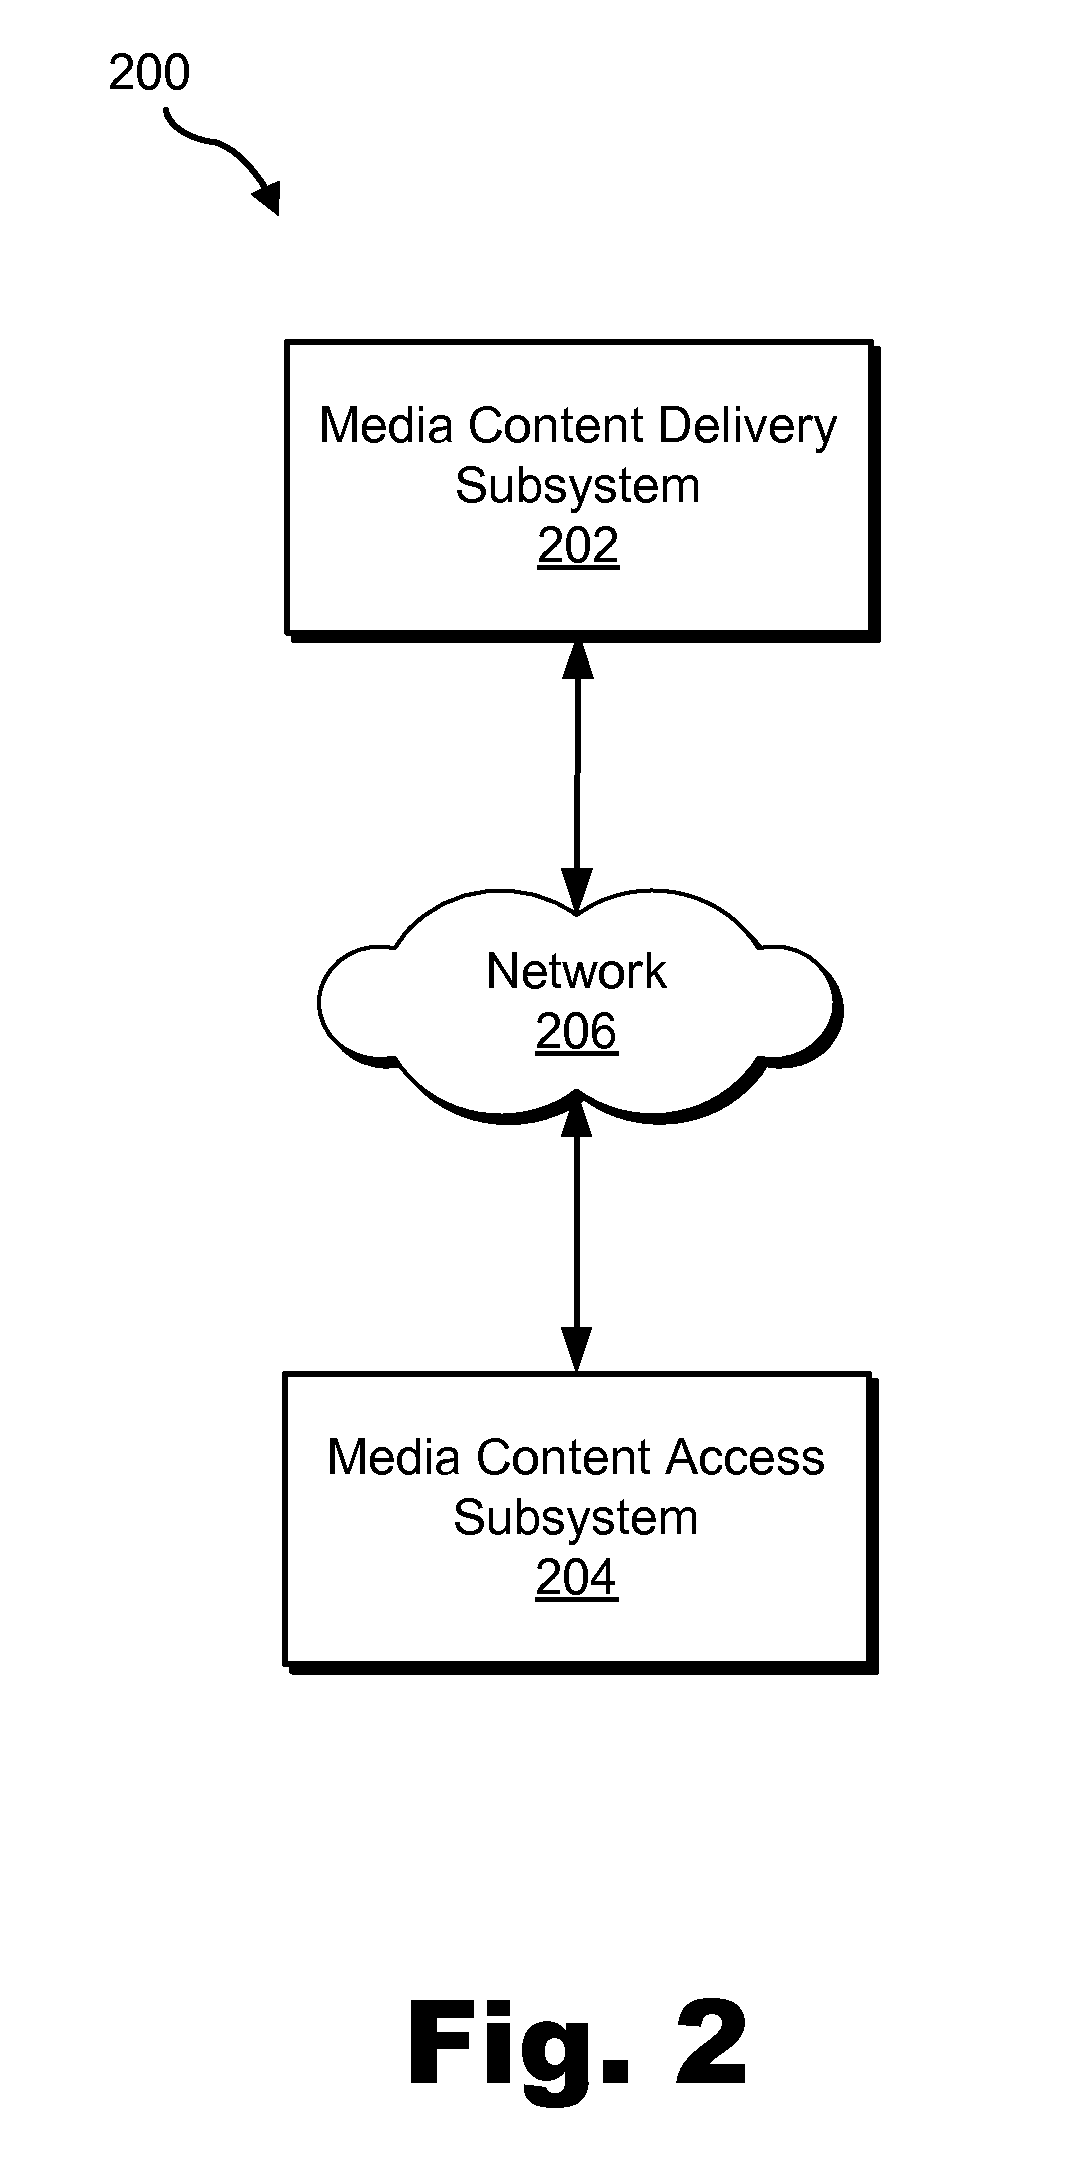 Dynamic user interface rendering based on usage analytics data in a media content distribution system